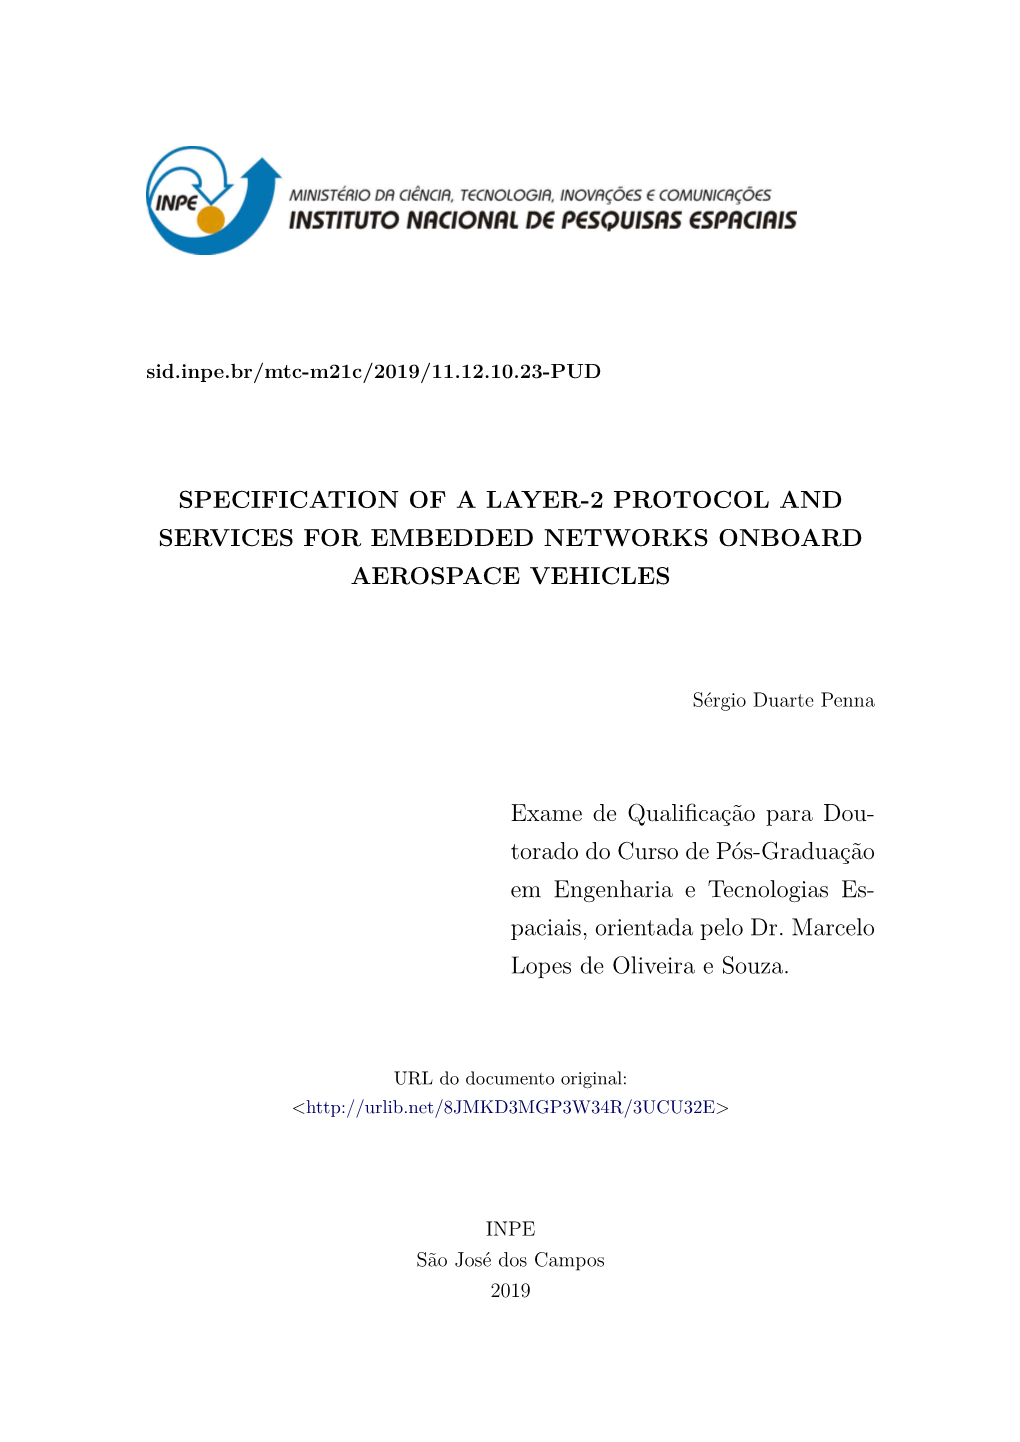 SPECIFICATION of a LAYER-2 PROTOCOL and SERVICES for EMBEDDED NETWORKS ONBOARD AEROSPACE VEHICLES Exame De Qualificação Para D